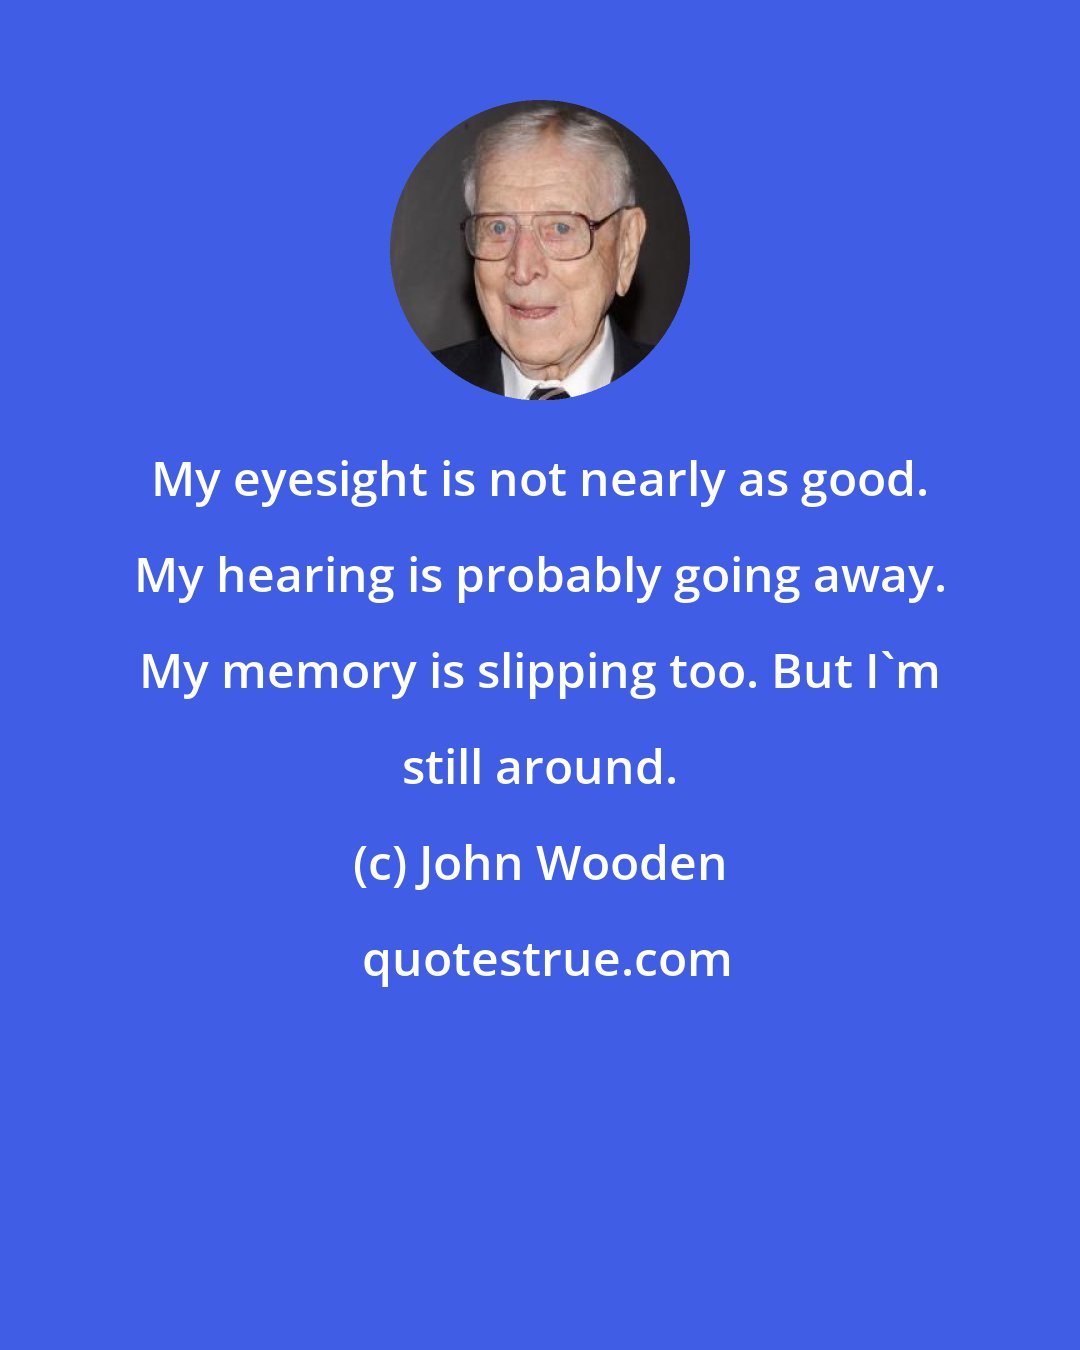 John Wooden: My eyesight is not nearly as good. My hearing is probably going away. My memory is slipping too. But I'm still around.